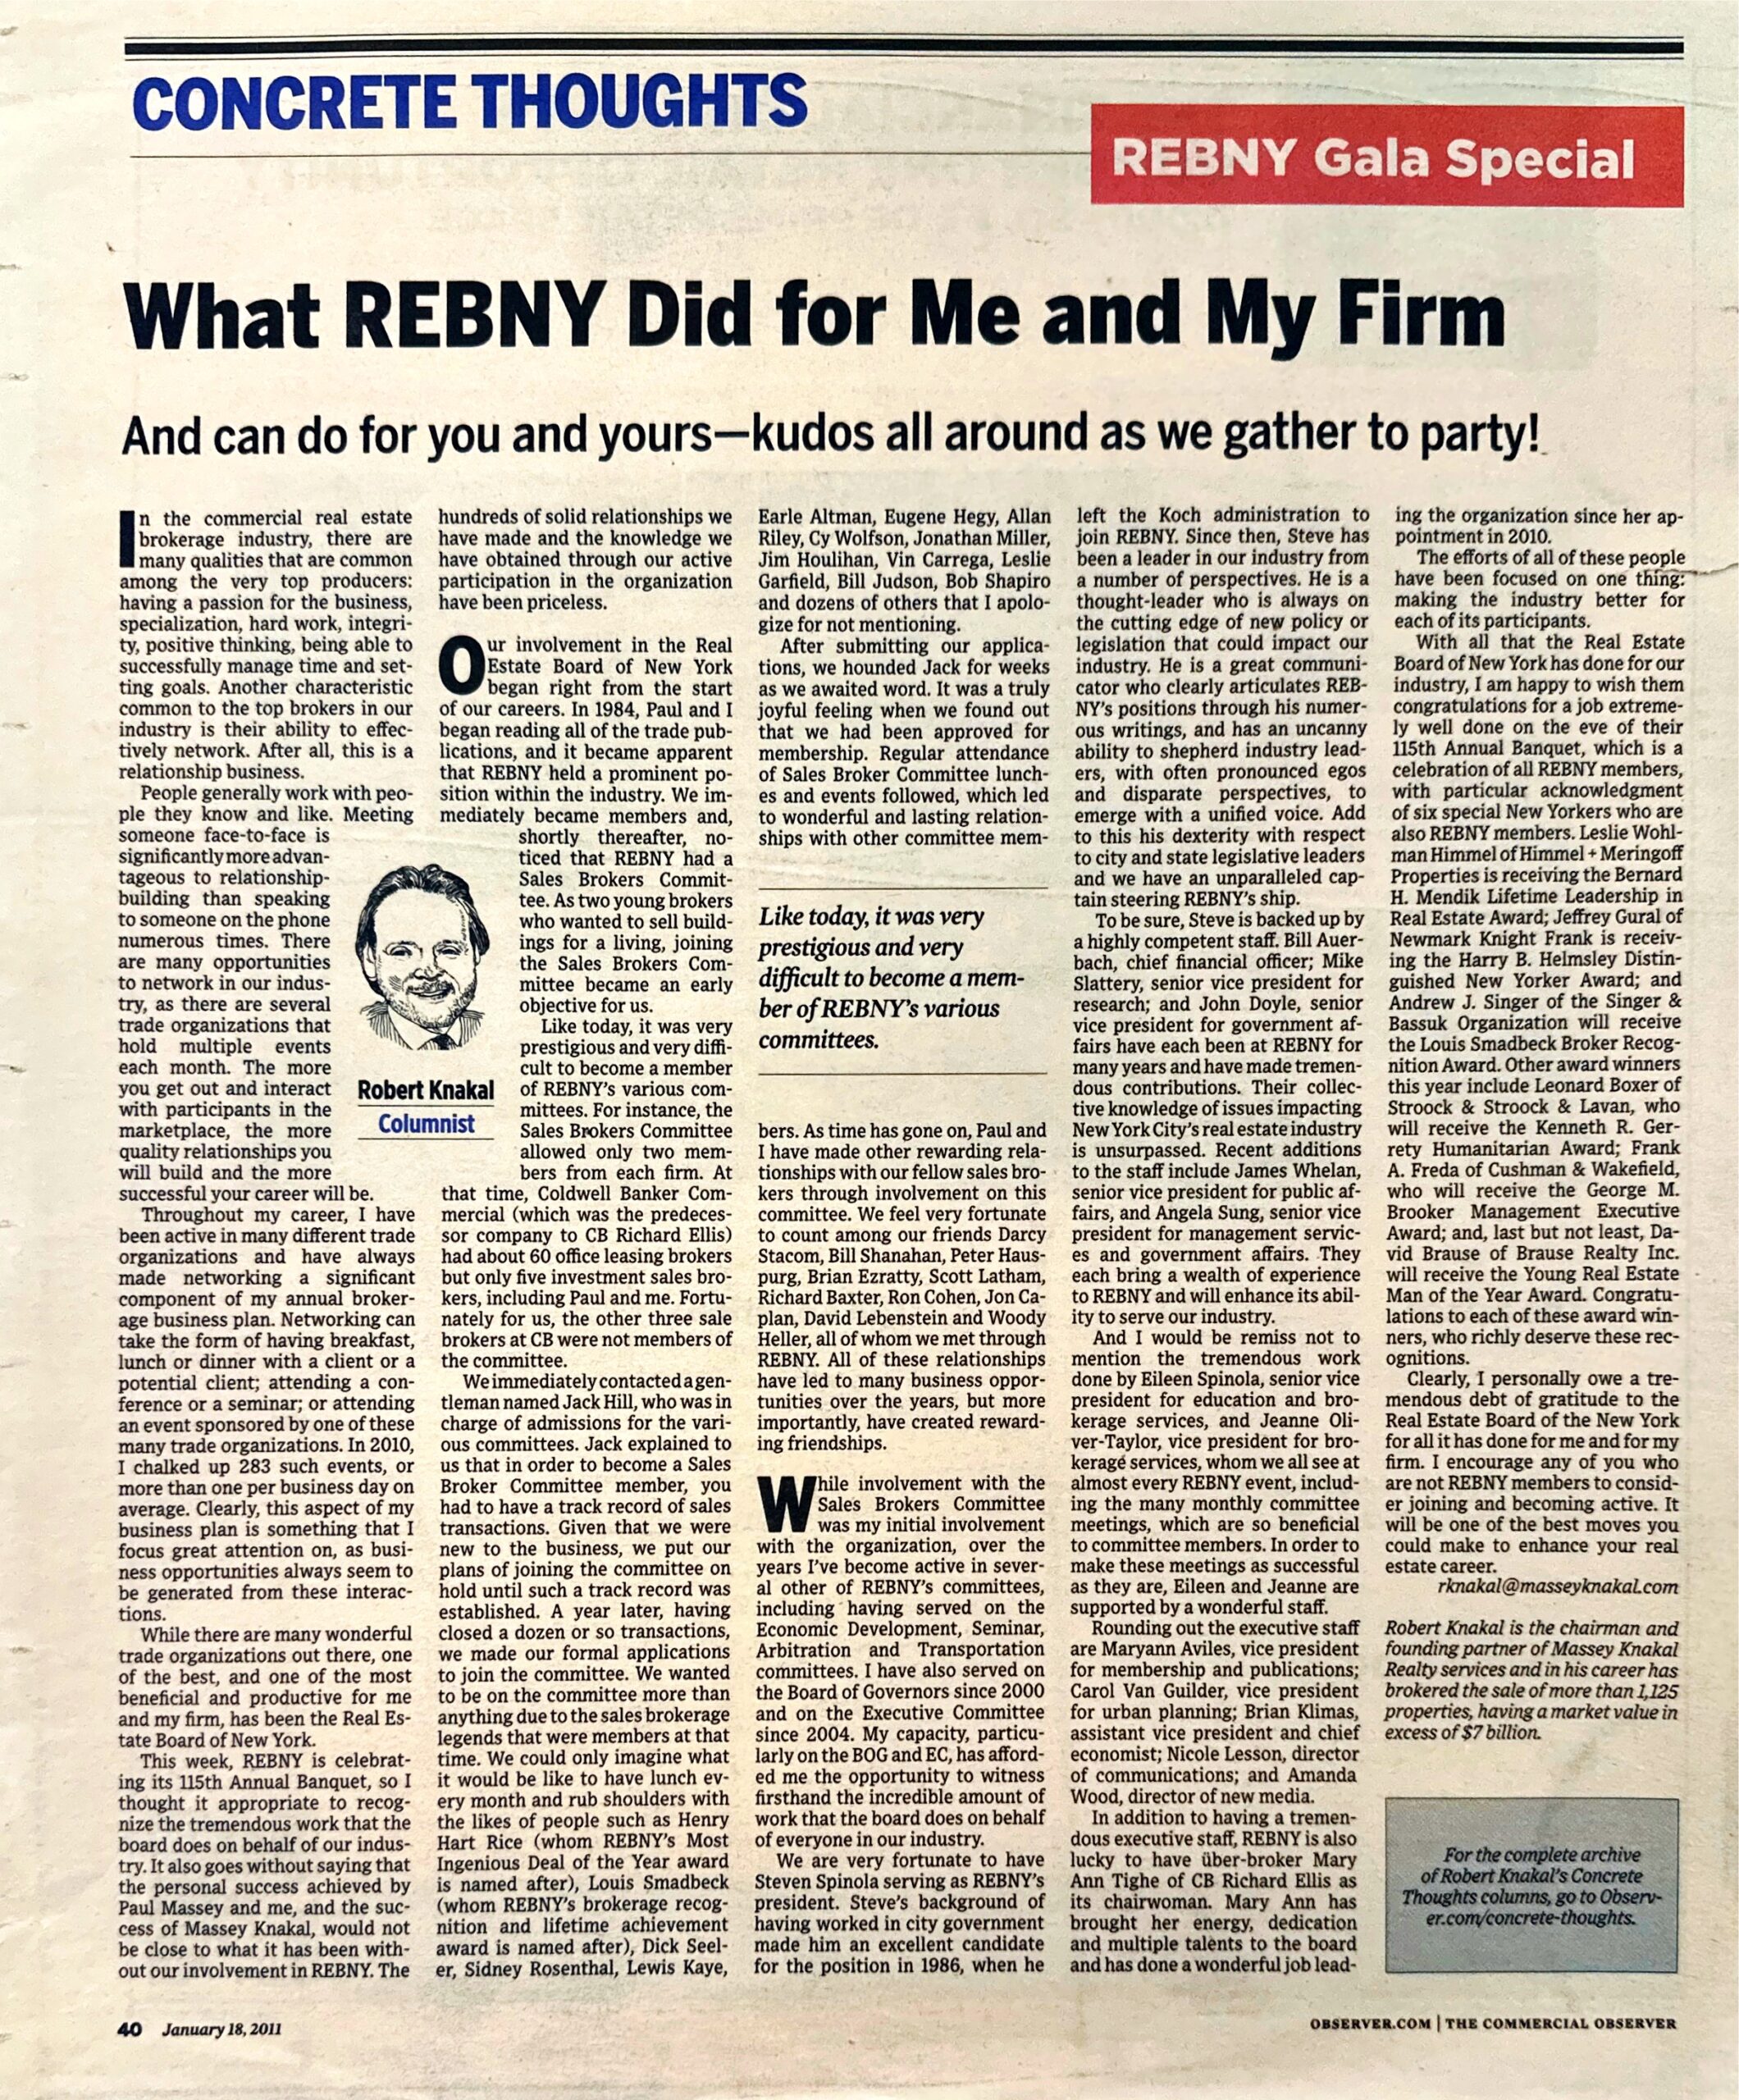 Concrete Thoughts - What REBNY Did for Me and My Firm 2011